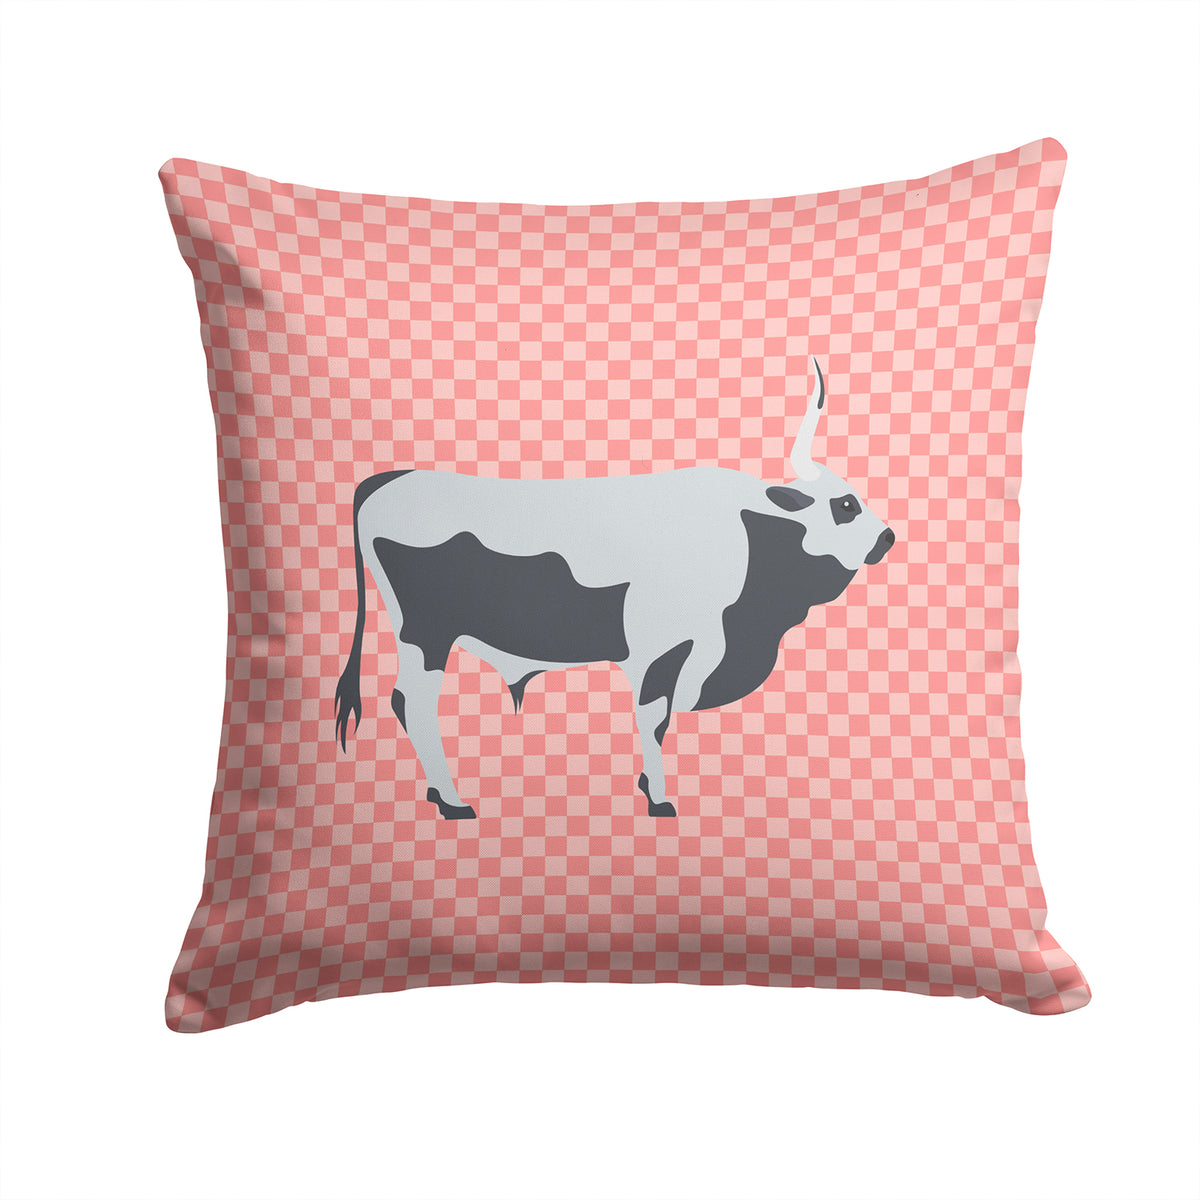 Hungarian Grey Steppe Cow Pink Check Fabric Decorative Pillow BB7824PW1414 - the-store.com